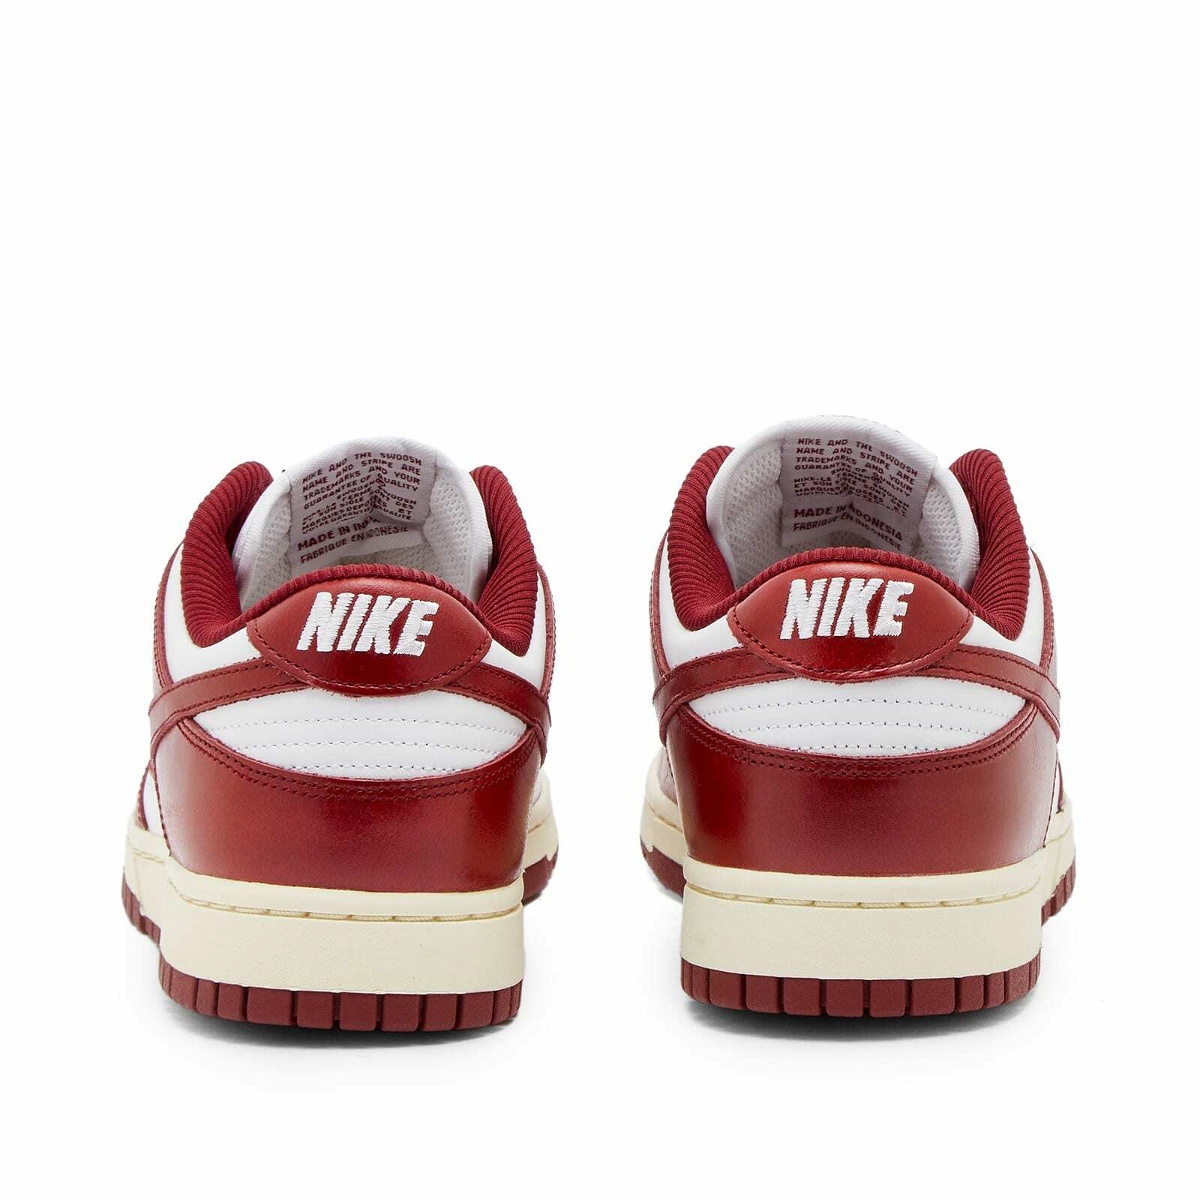 Nike Dunk Low Prm W Sneakers in White/Team Red/Coconut Milk Nike